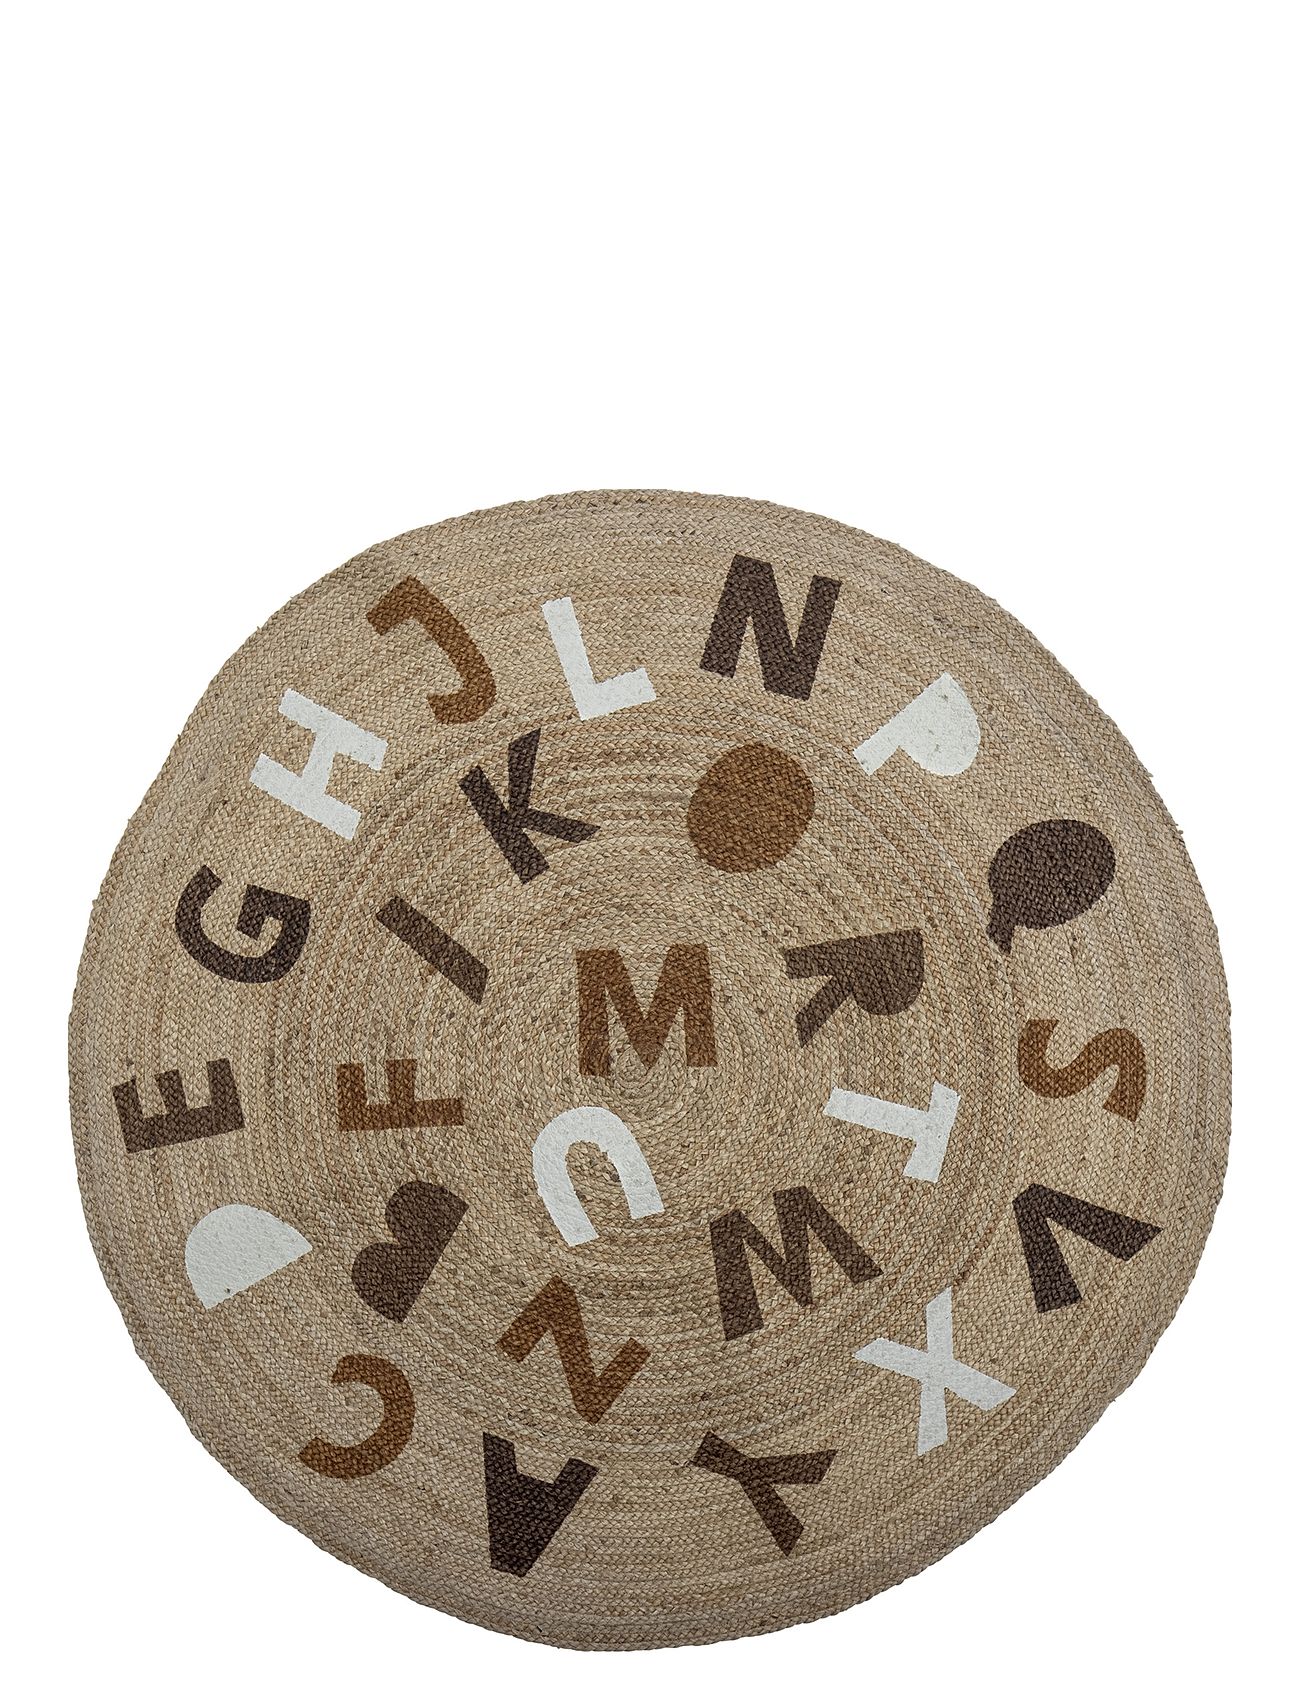 Dinne Rug, Brown, Jute Home Kids Decor Rugs And Carpets Round Rugs Multi/patterned Bloomingville